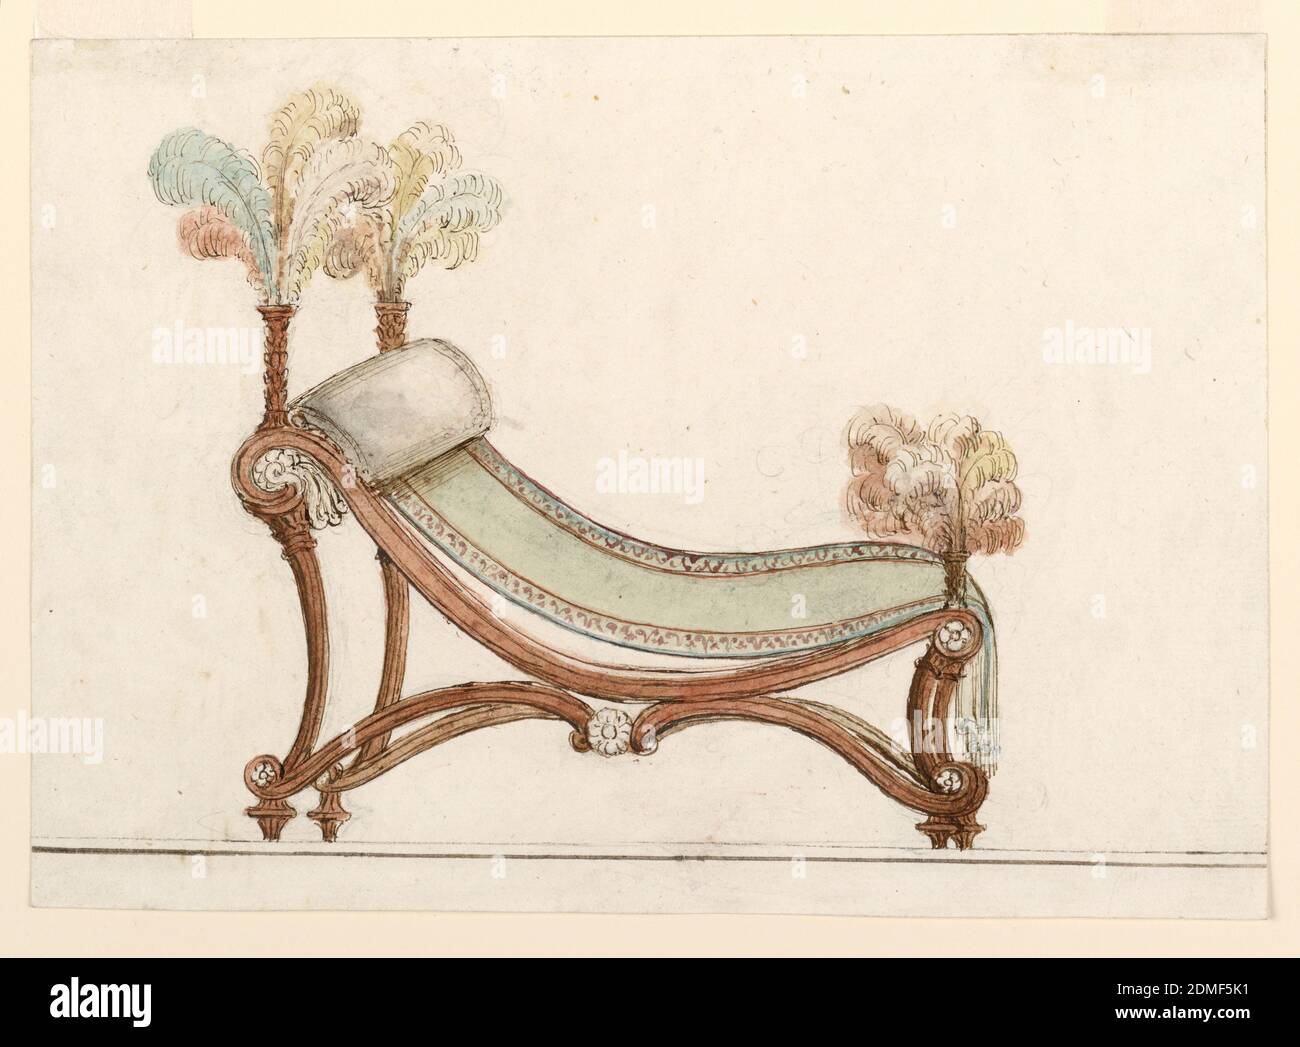 Design for a Sofa, Pen and ink, brush and watercolor, graphite on paper;  verso: graphite, Horizontal rectangle. Design for a sofa or chaise longue  shown slightly obliquely in profile, with the head